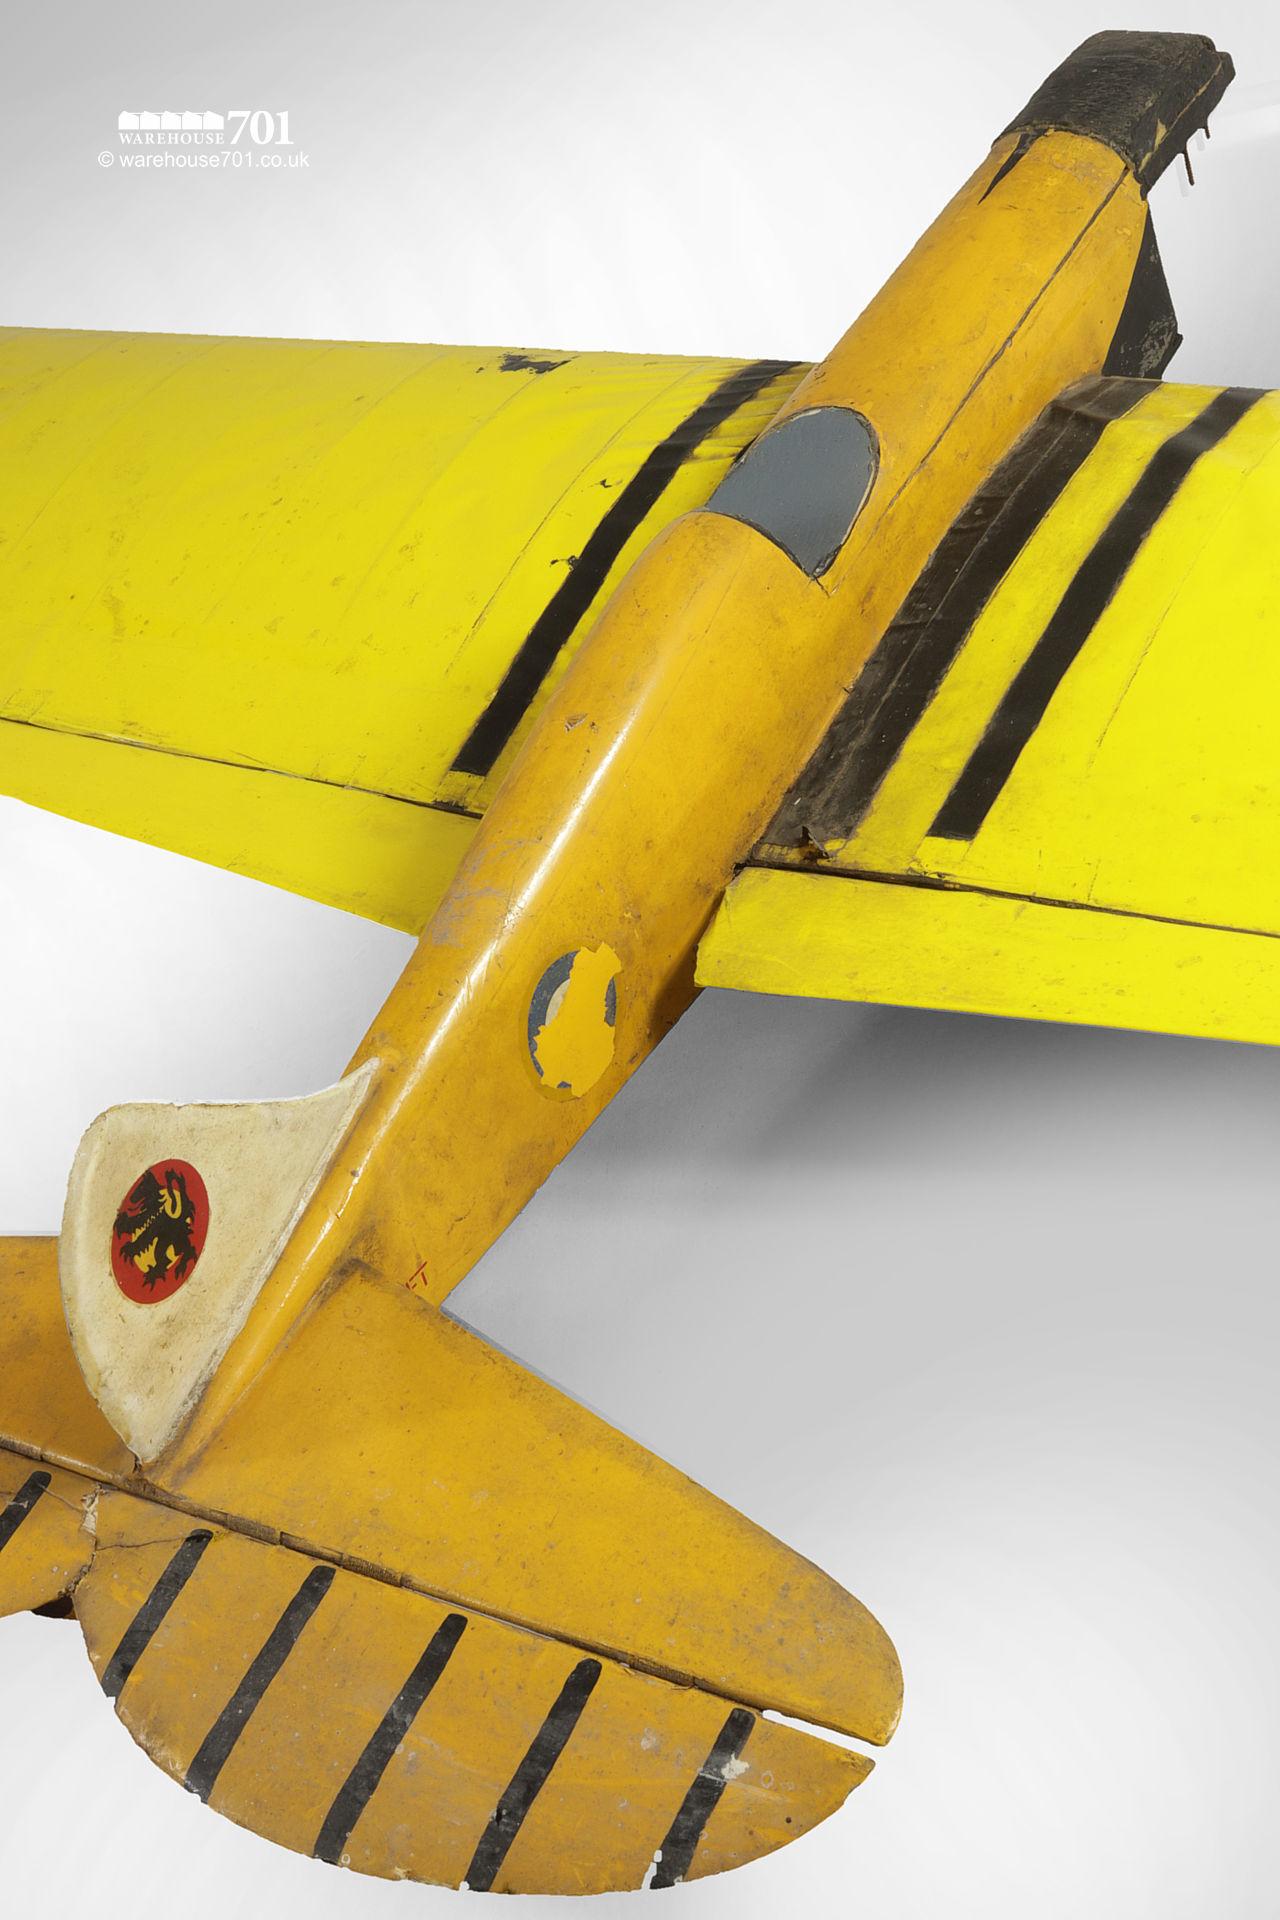 Old Control-Line and Other Model Aeroplanes for Display or Repair #2